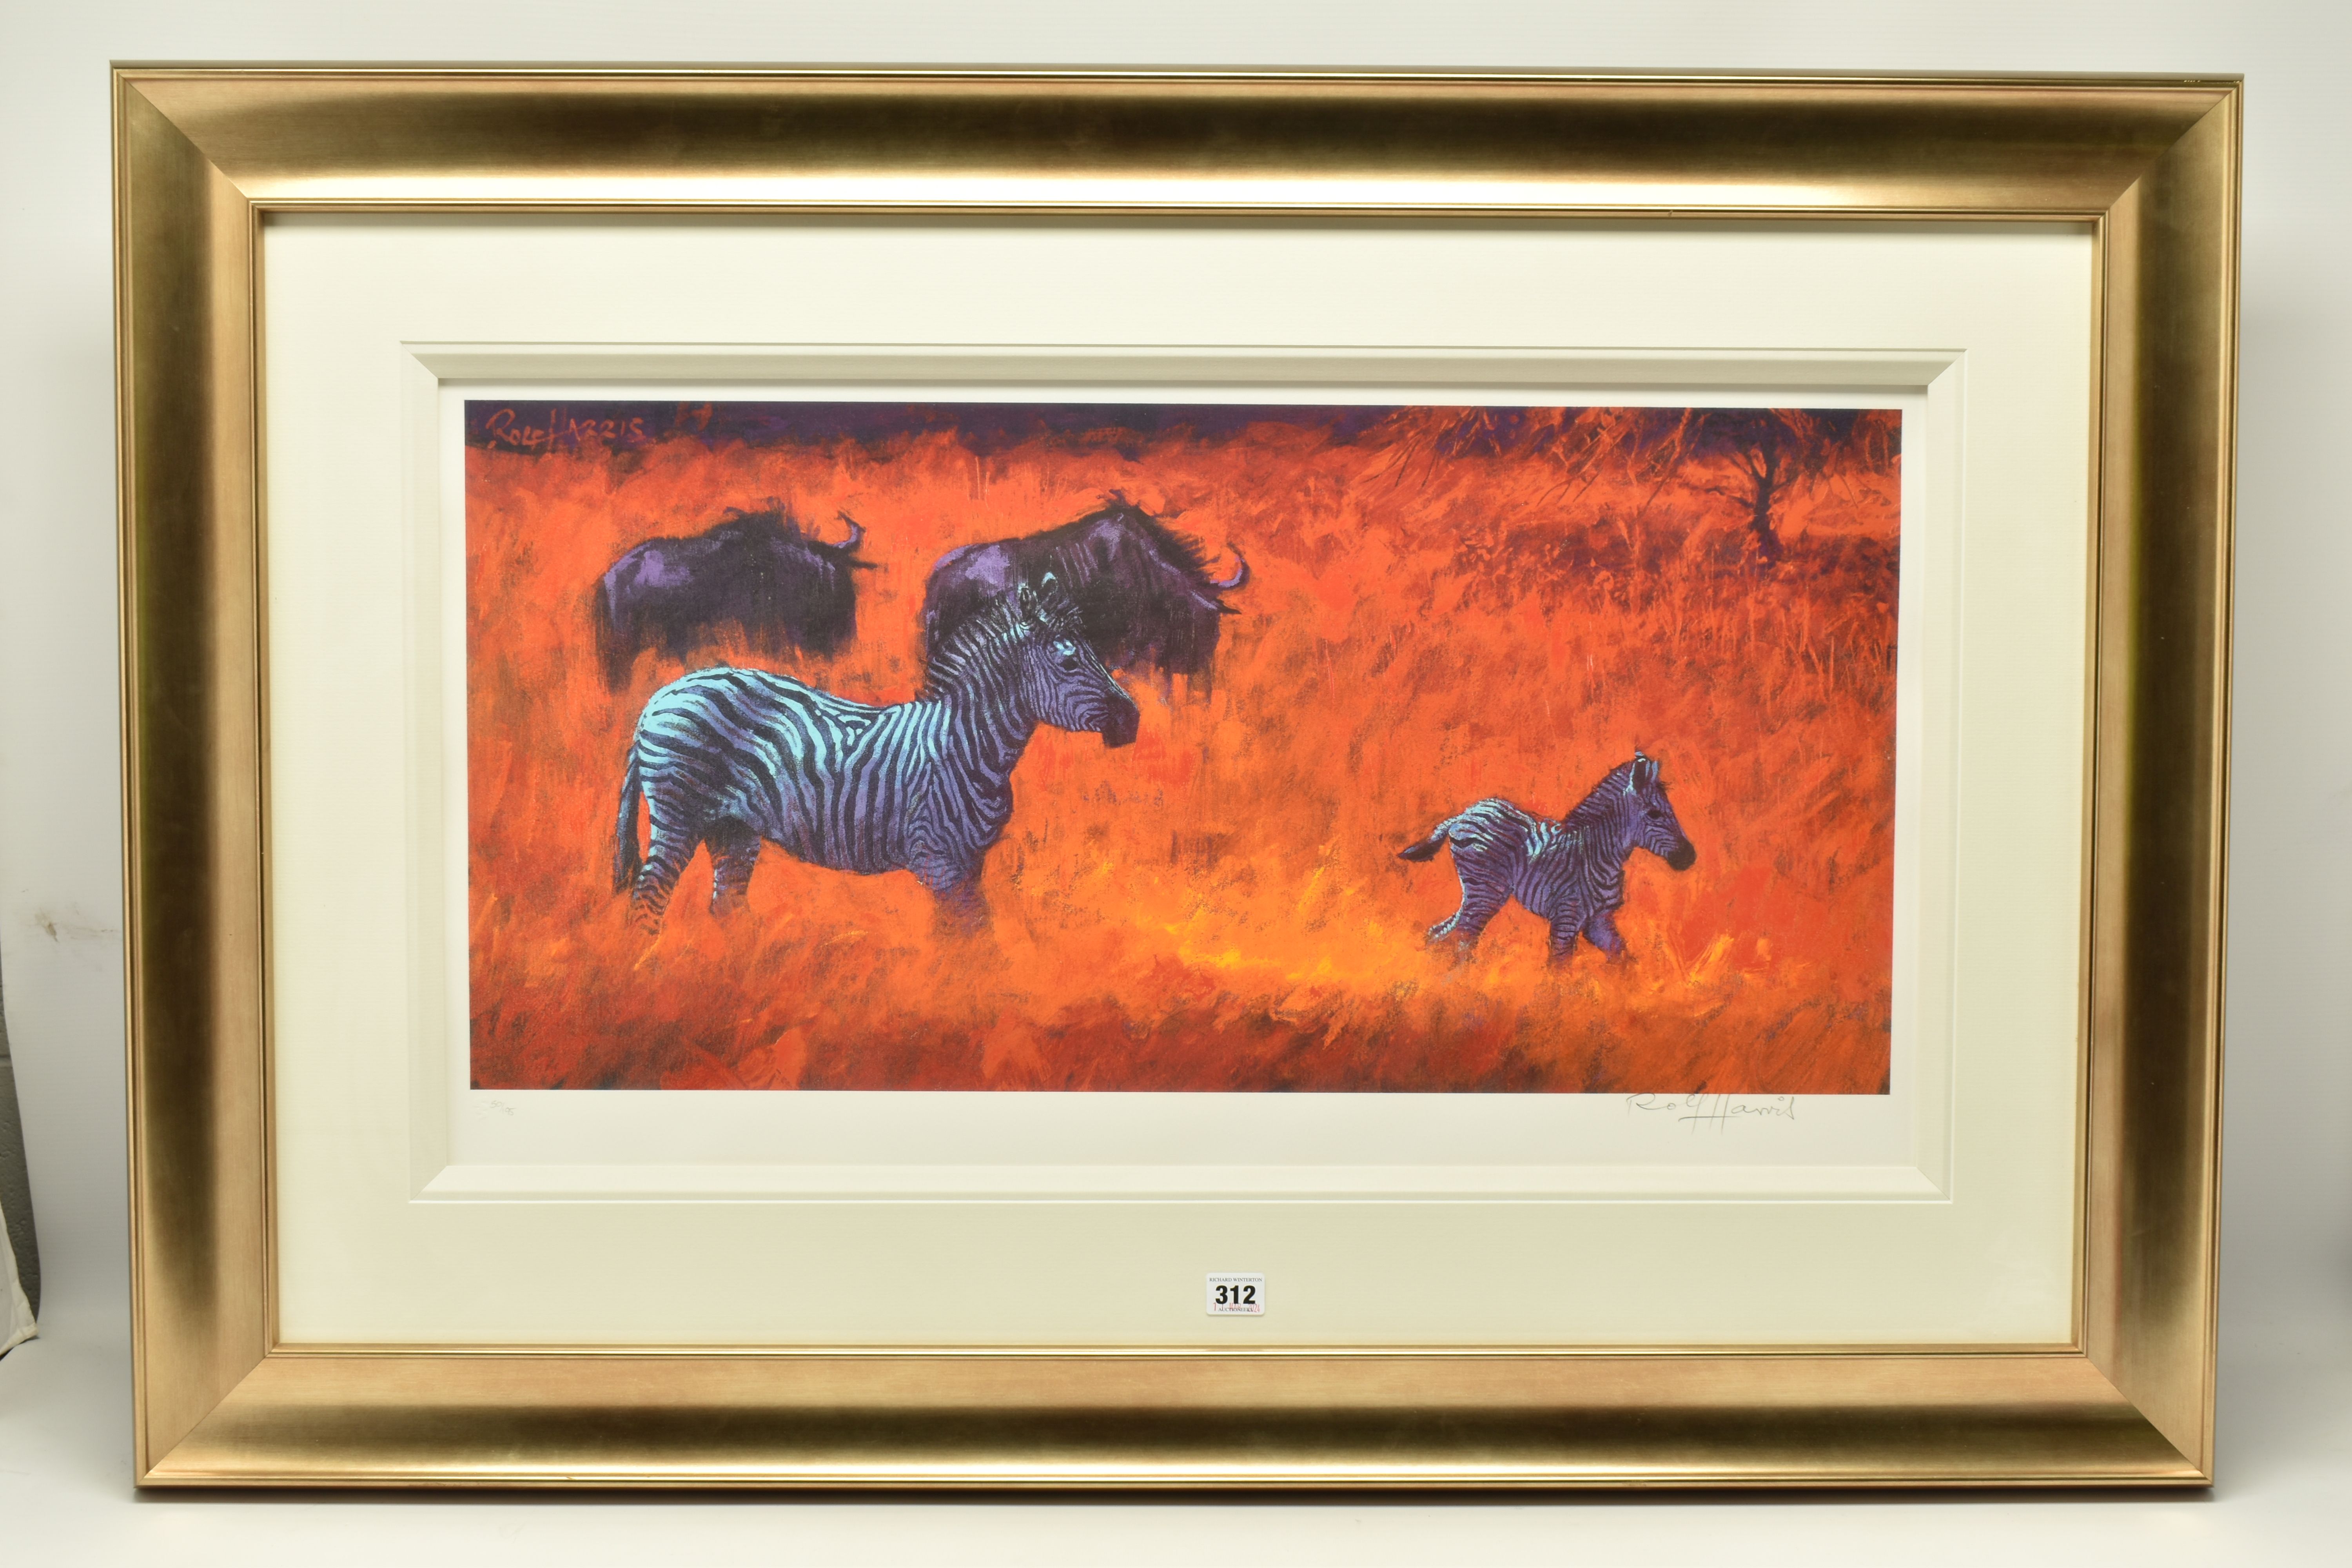 ROLF HARRIS (AUSTRALIA 1930) ' ZEBRA AND WILDEBEEST', a signed limited edition print on paper, 50/